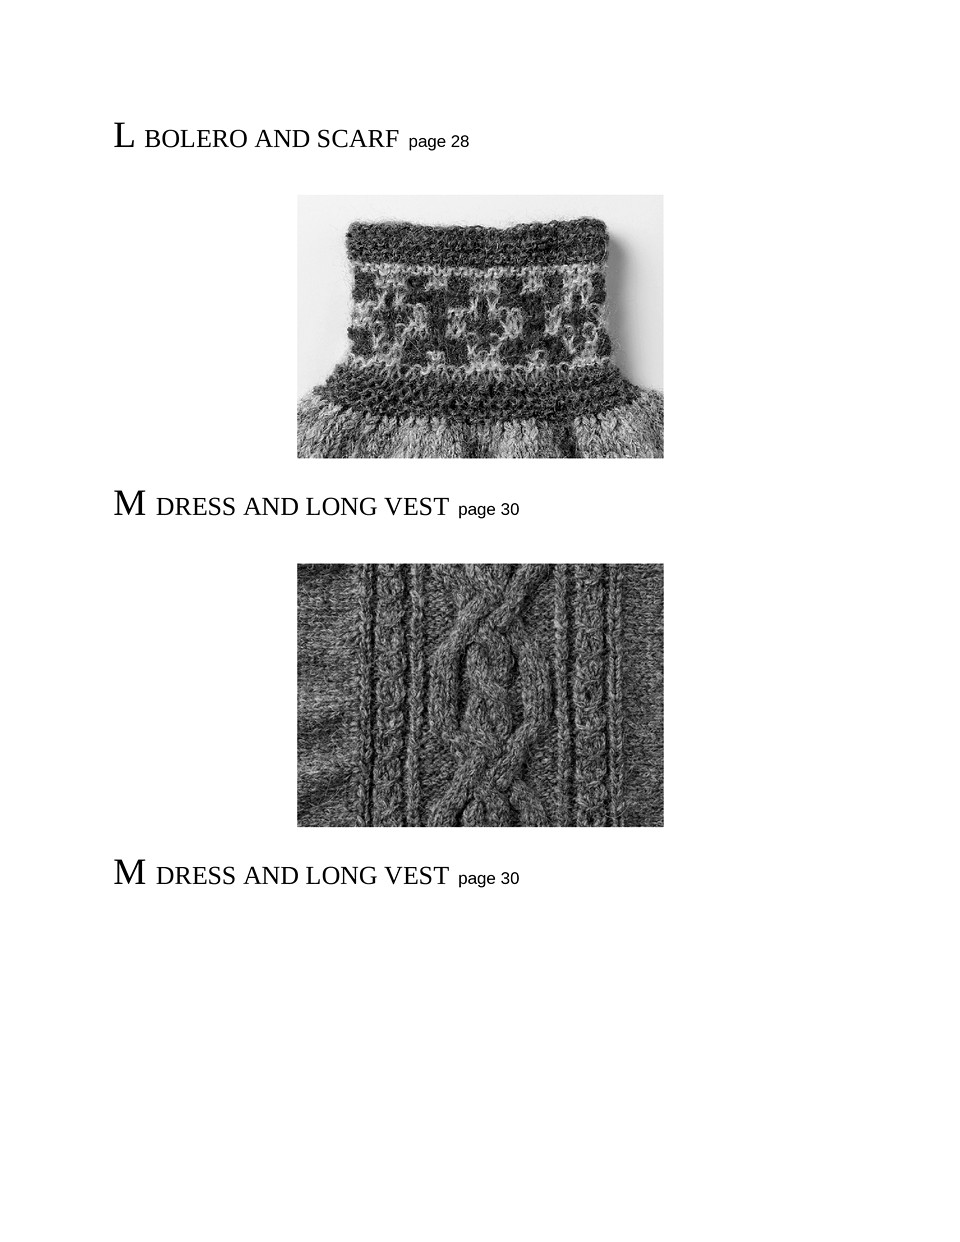 Japanese Knitting Patterns for Sweaters Scarves and More-200